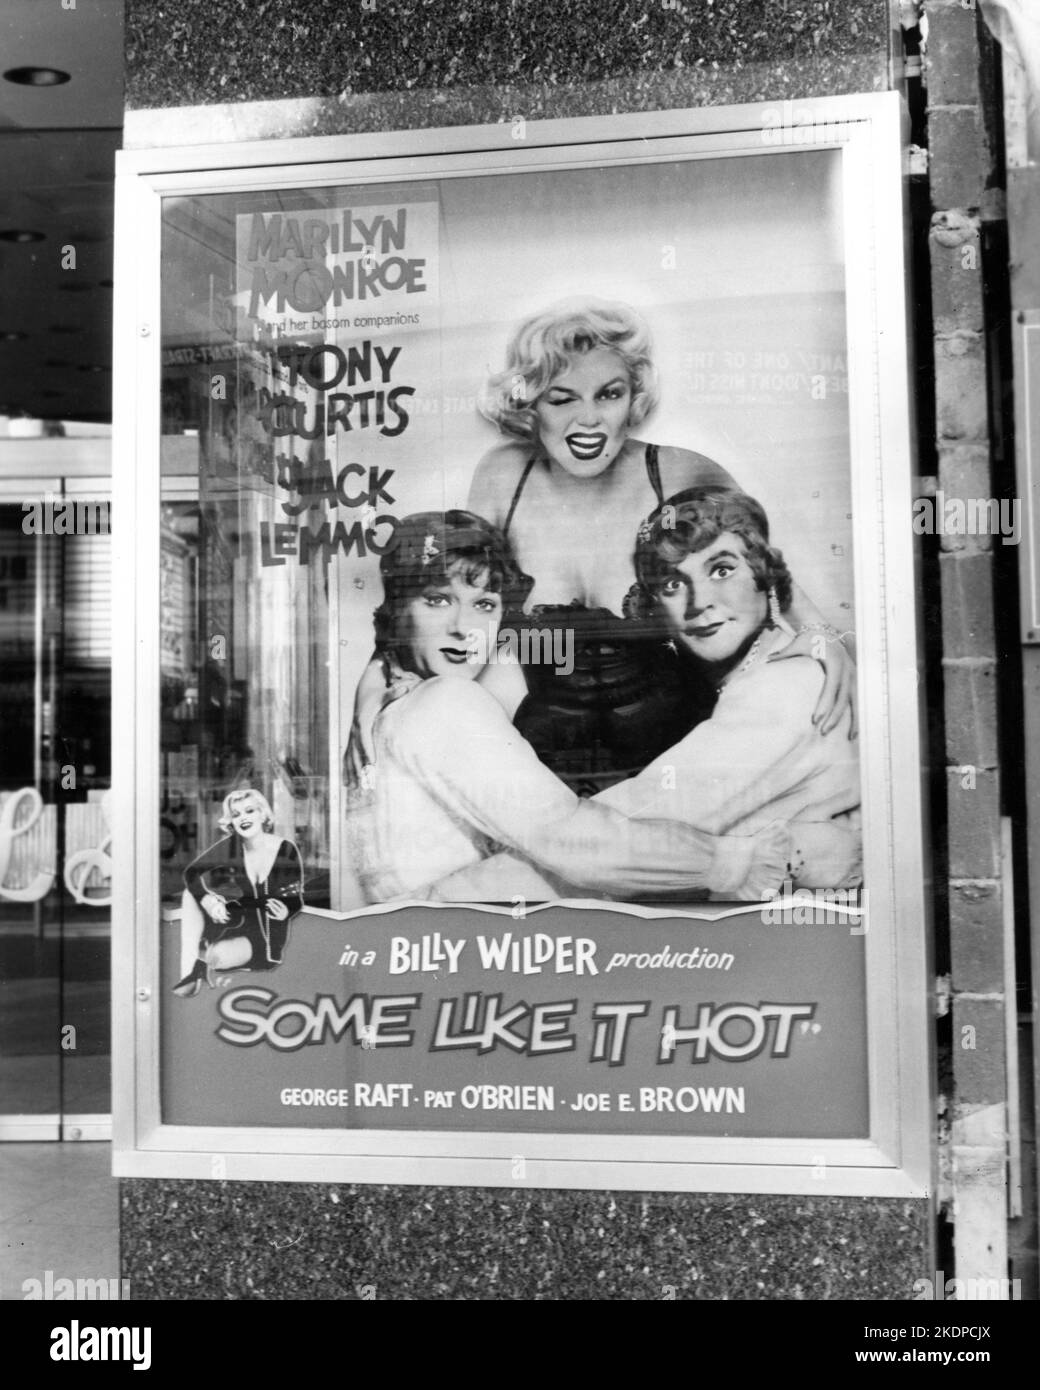 Outside of Loew's State Movie Theatre in New York City in March 1959 showing advertising display for MARILYN MONROE TONY CURTIS and JACK LEMMON in SOME LIKE IT HOT 1959 director BILLY WILDER screenplay Billy Wilder and I.A.L. Diamond Ashton Productions / The Mirisch Corporation / United Artists Stock Photo